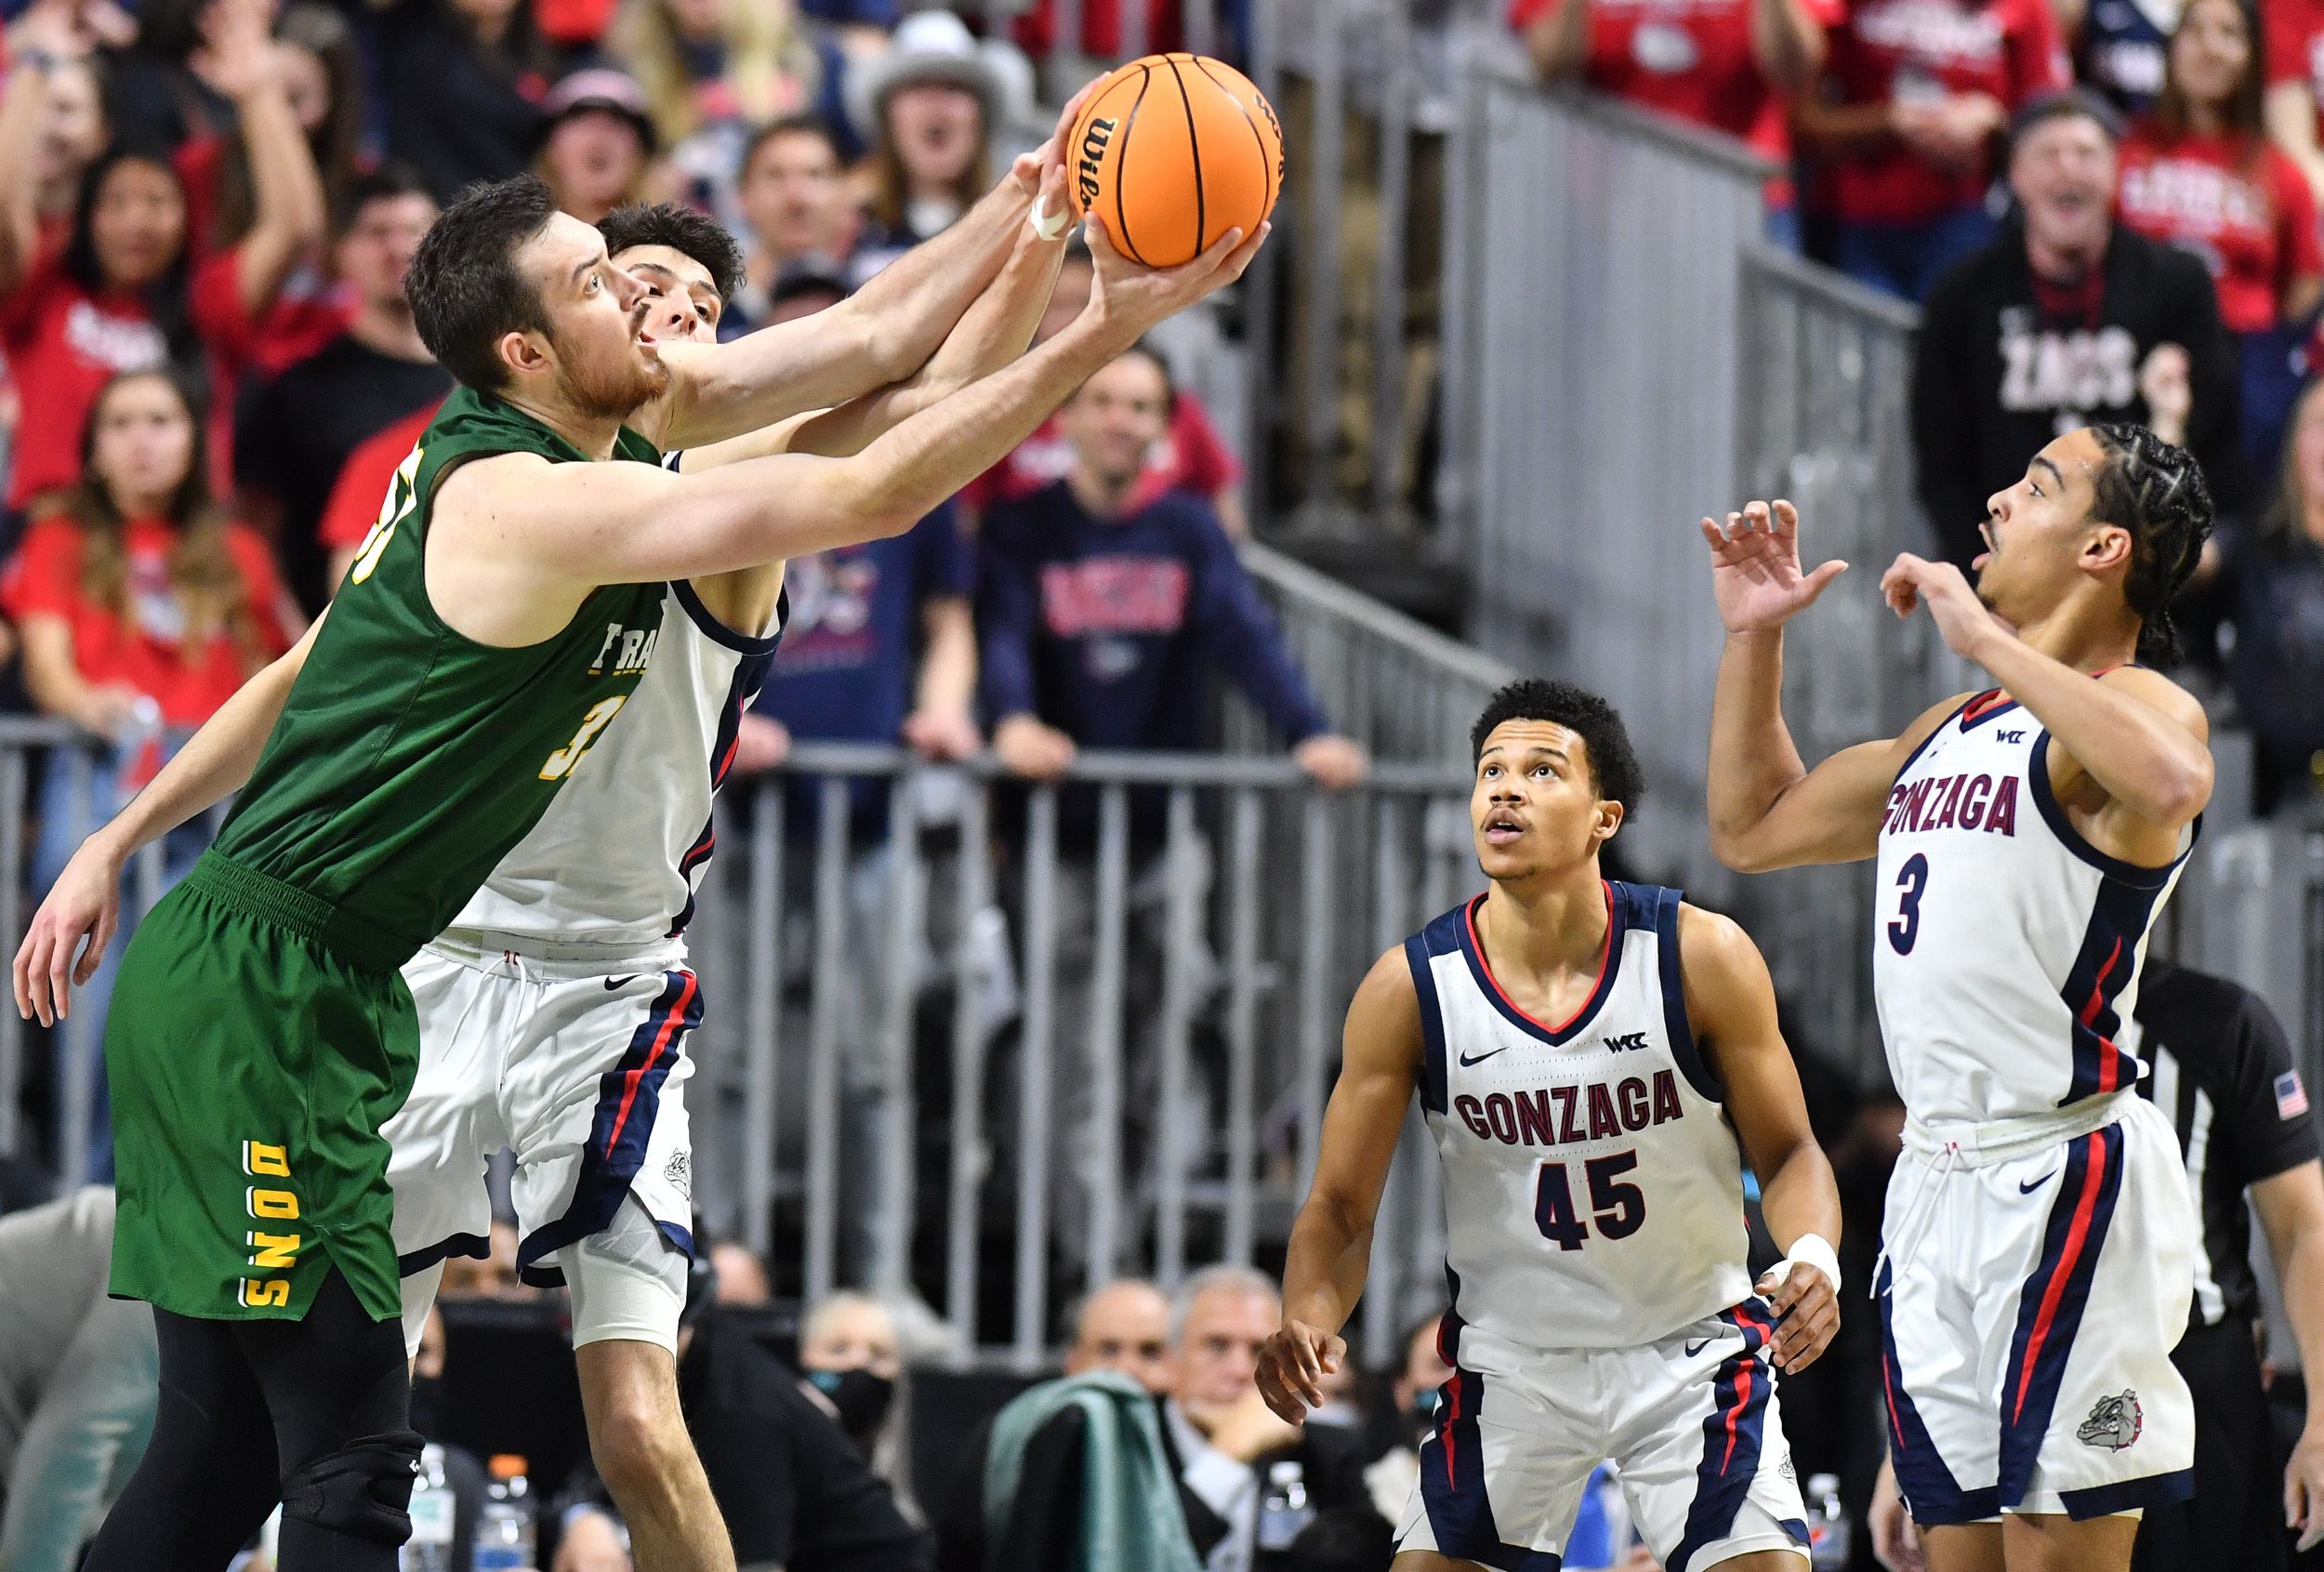 No. 9 Gonzaga men pull away late to beat USF in WCC semifinals